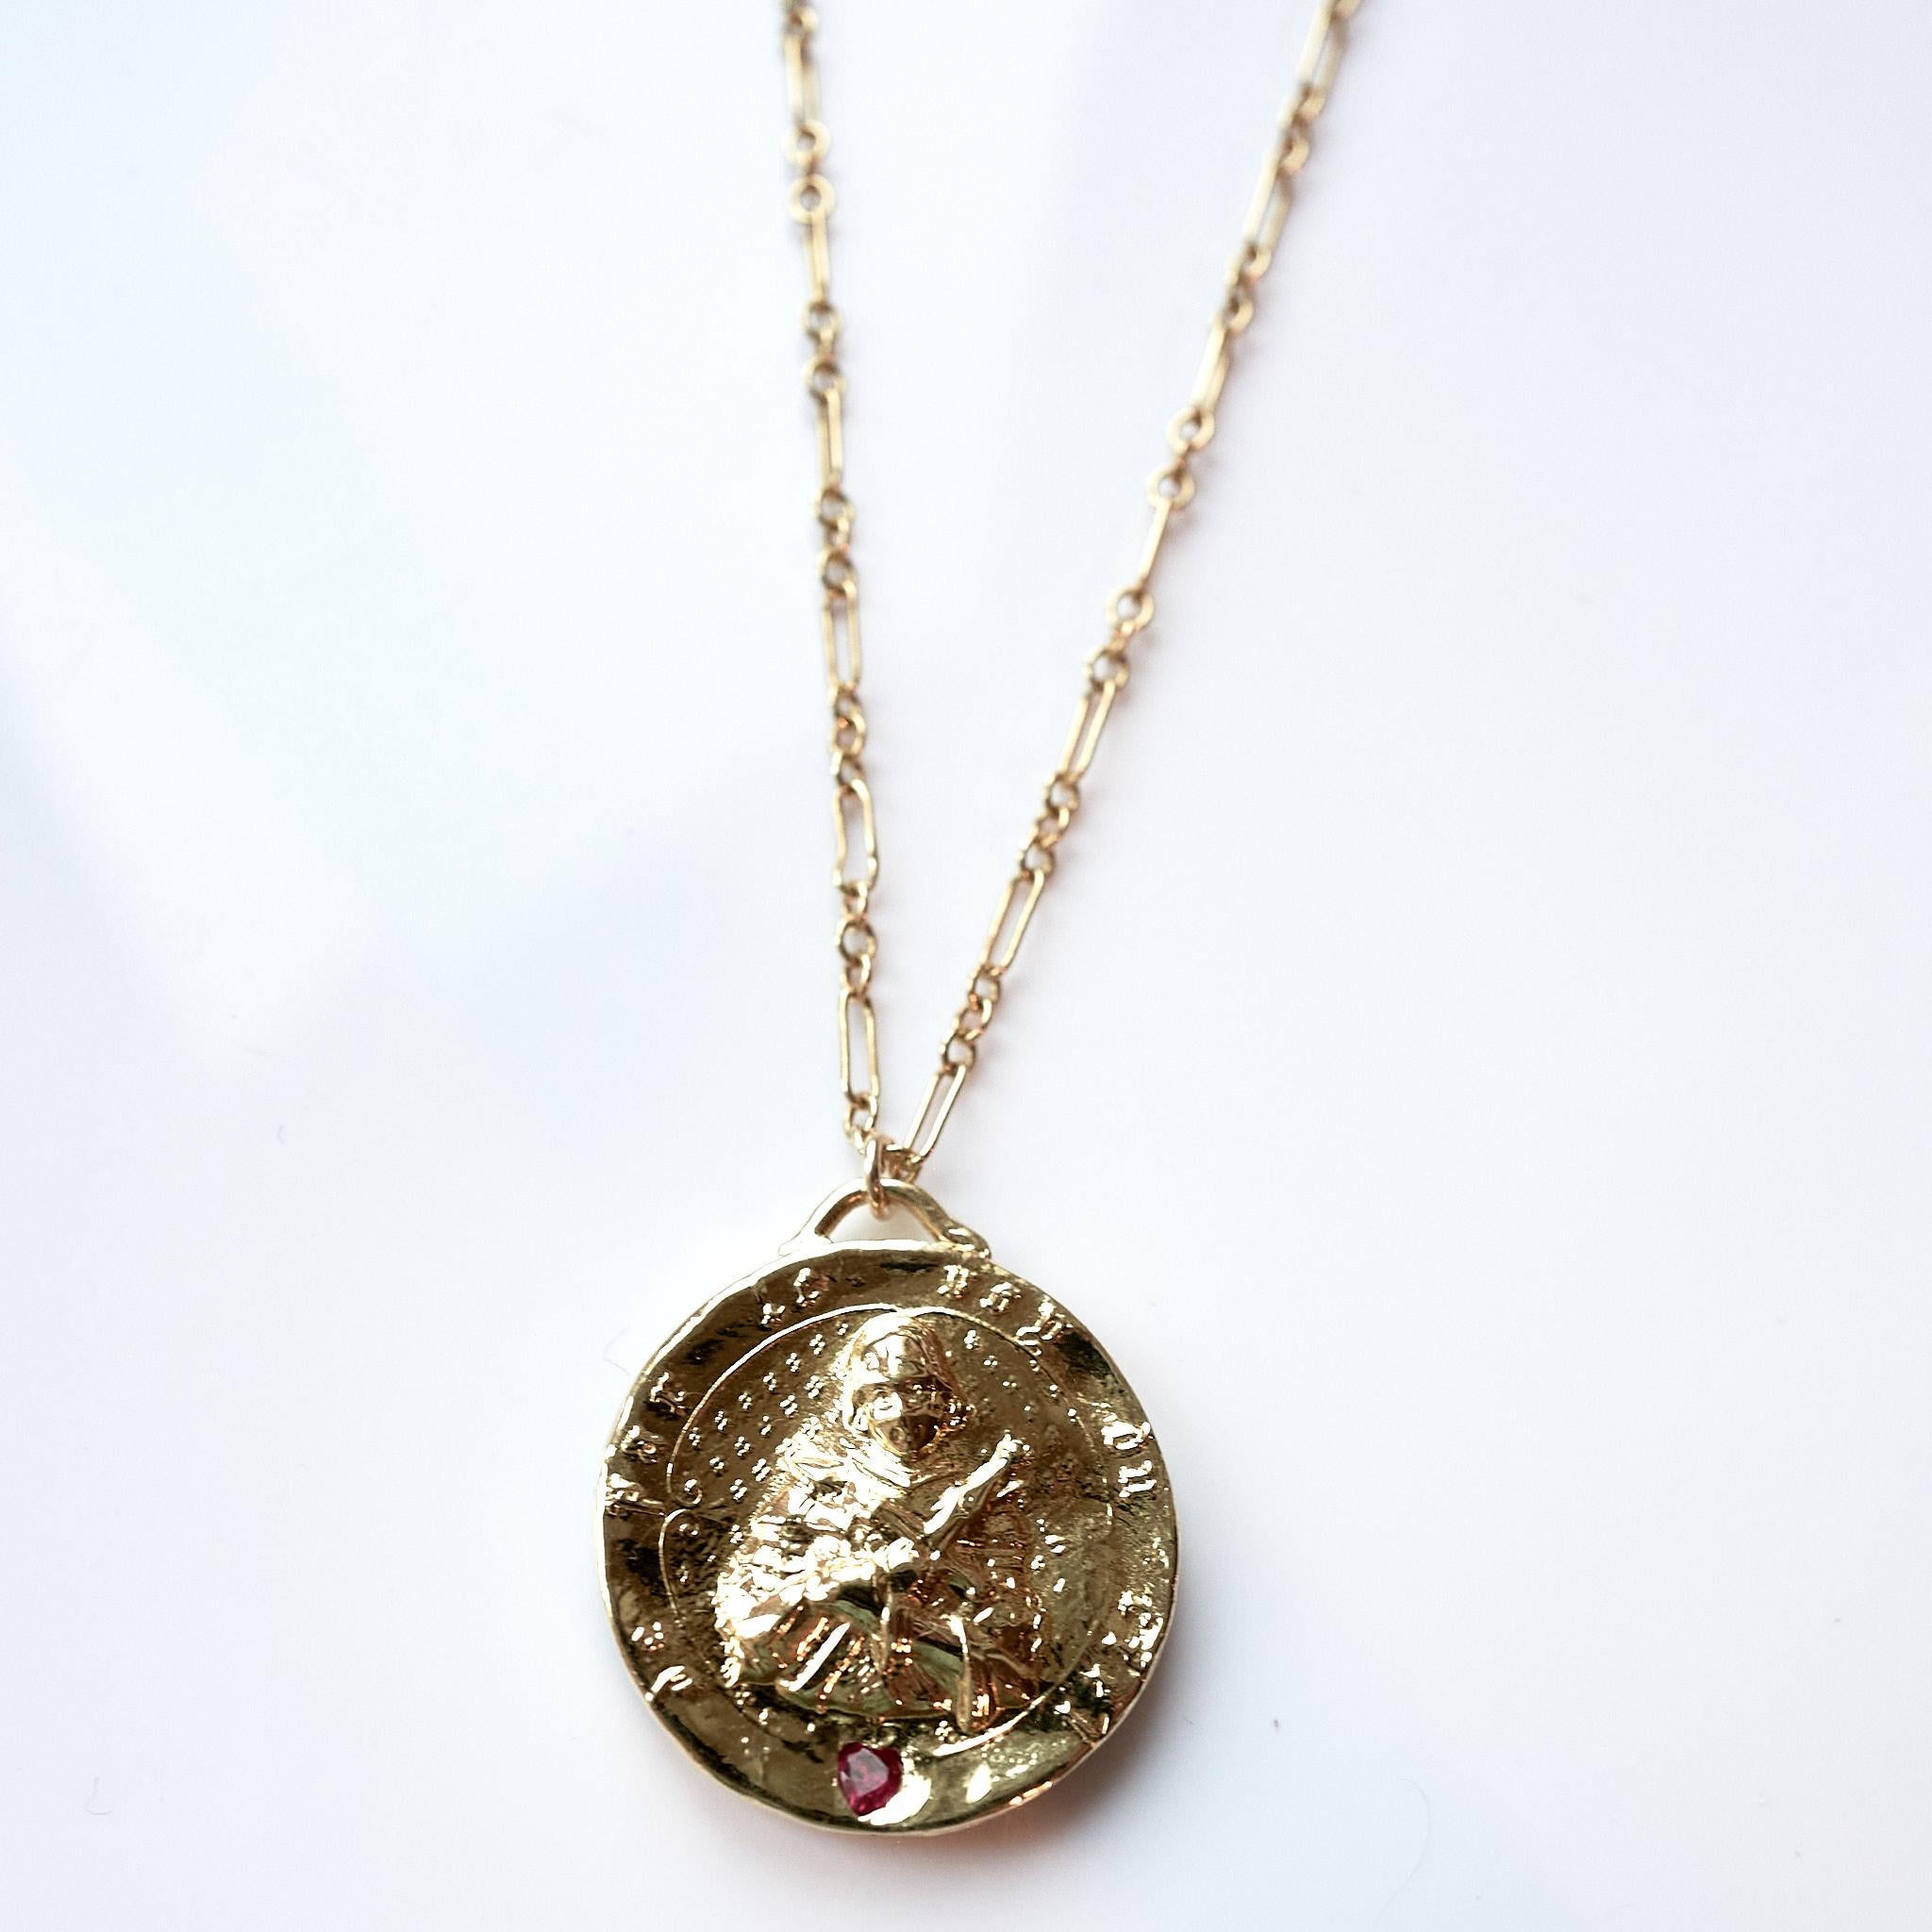 Heart Ruby Medal Joan of Arc Gold Plated on a gold filled Chain Necklace 
Designer: J Dauphin
28